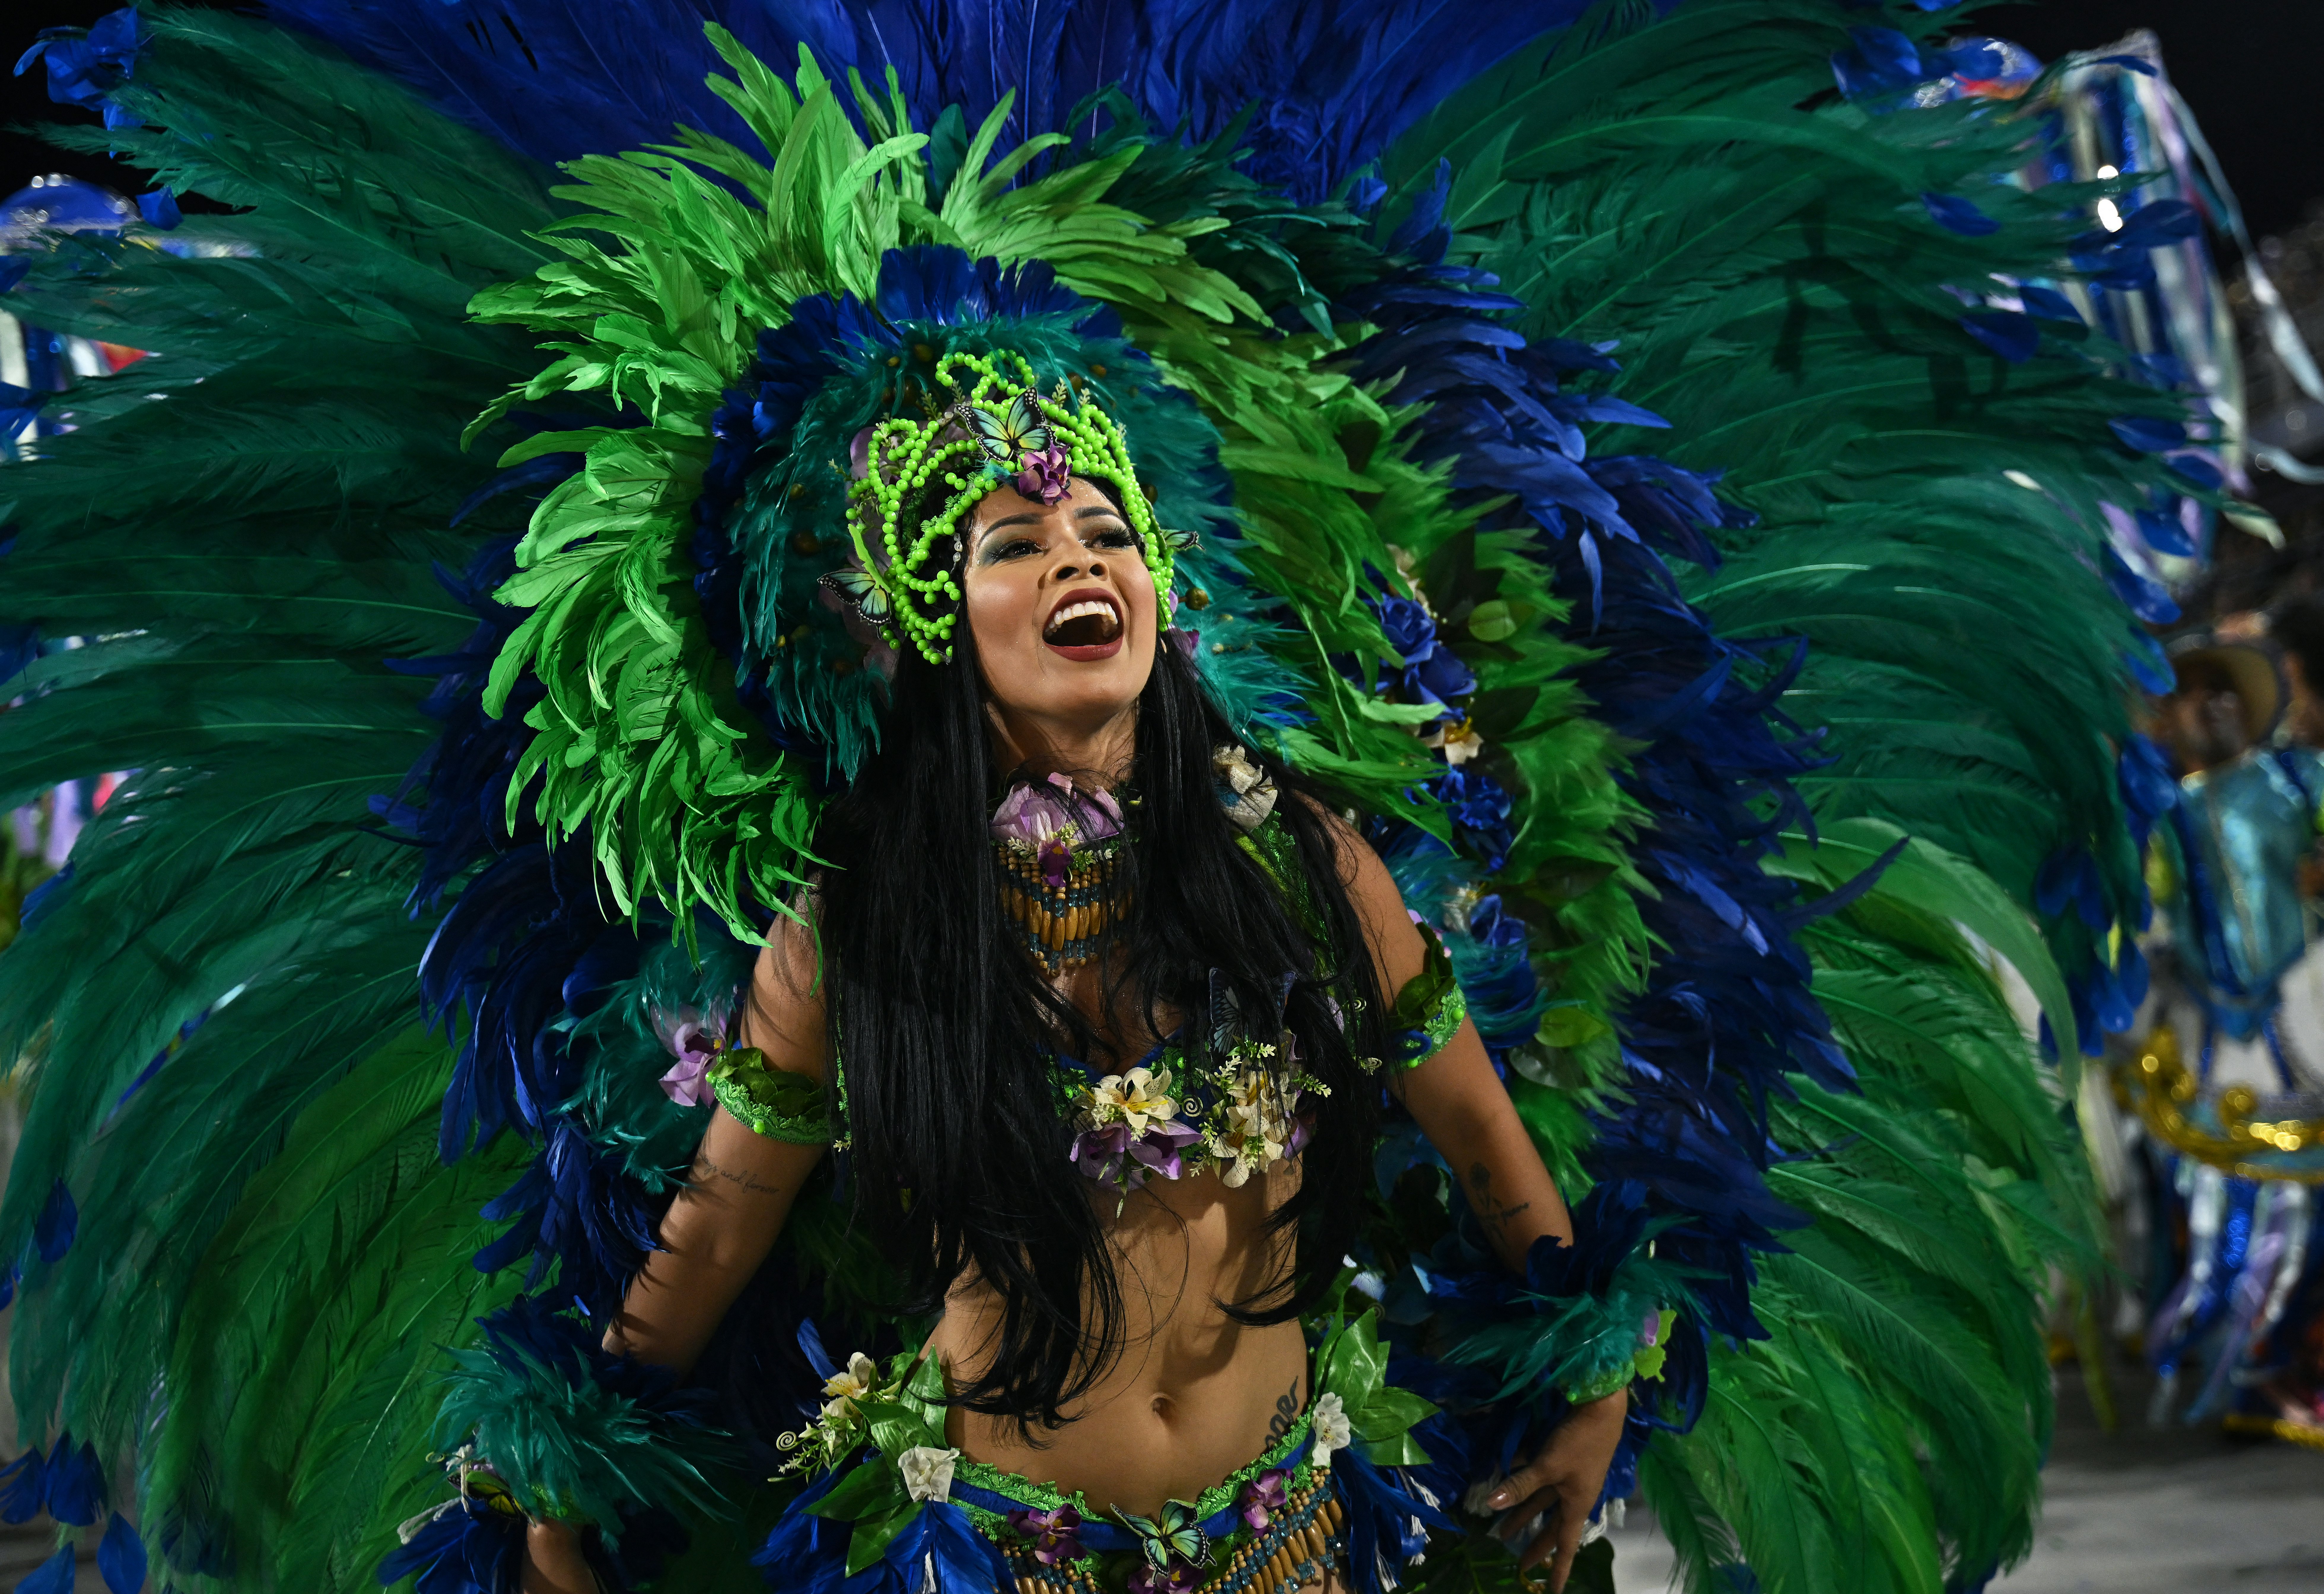 How To Prepare For Your First Carnaval In Rio De Janeiro, Brazil